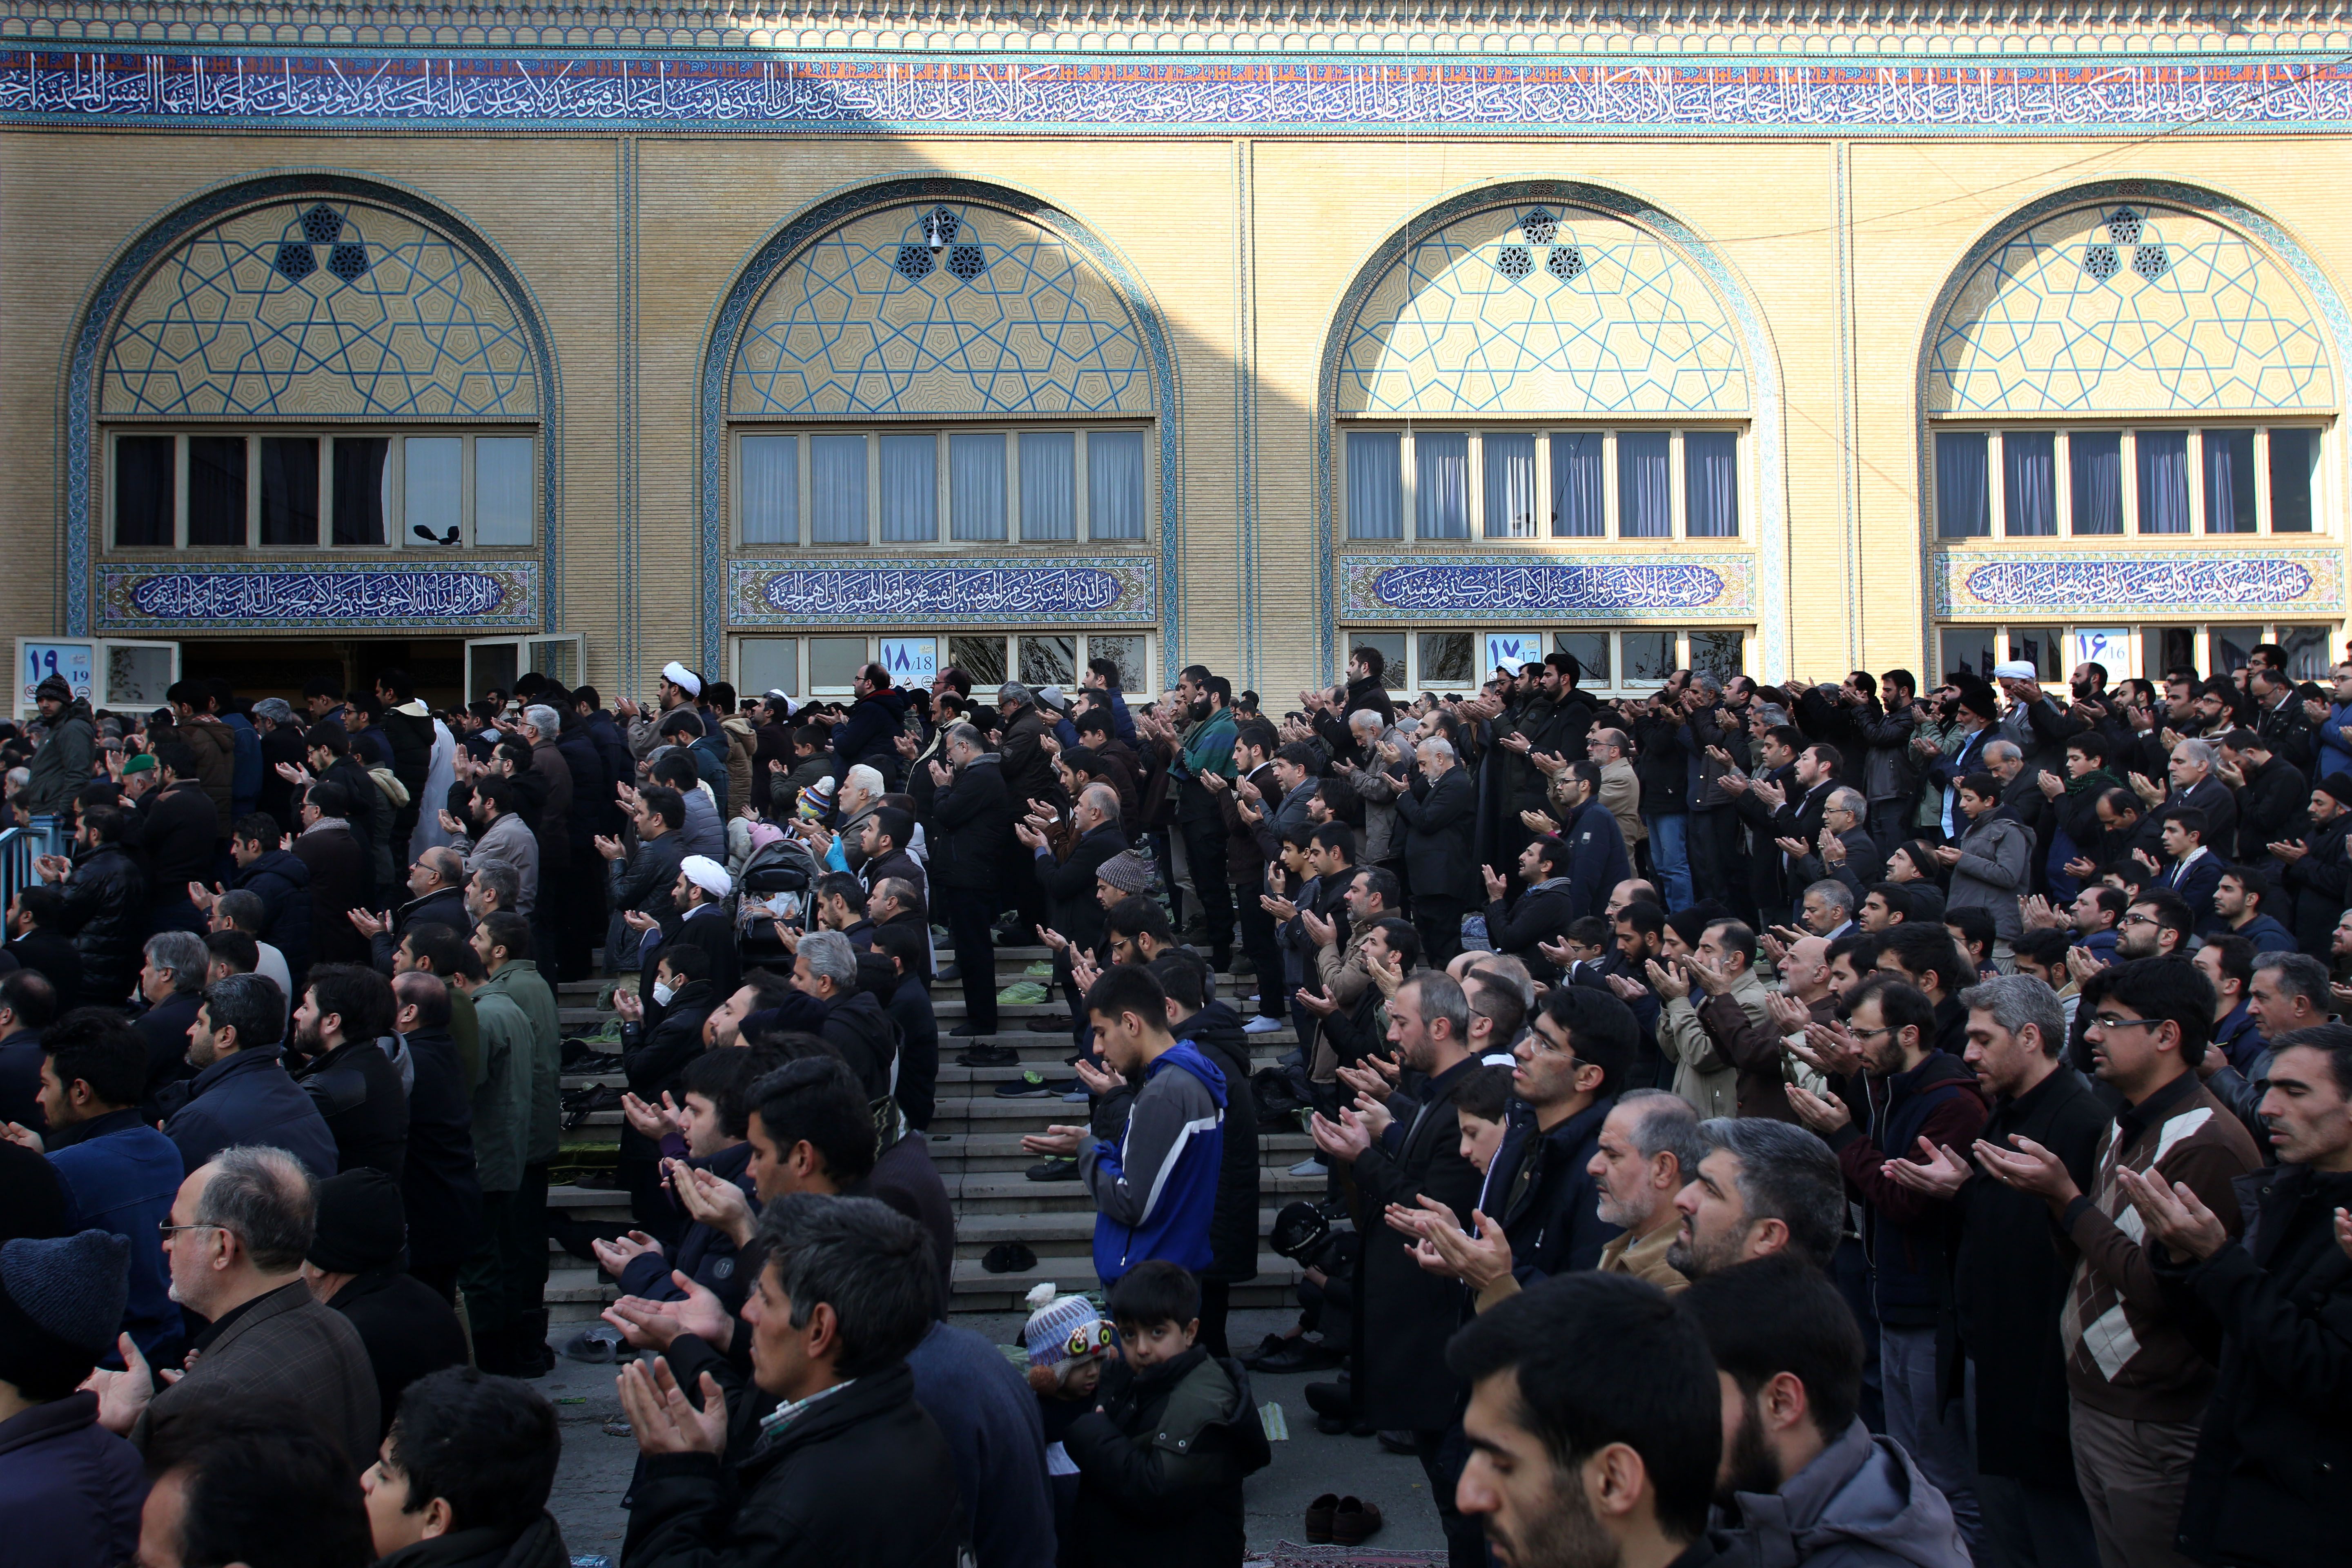 Iranian worshipers attend a mourning prayer for Qasem Soleimani in Iran's capital Tehran on January 3.